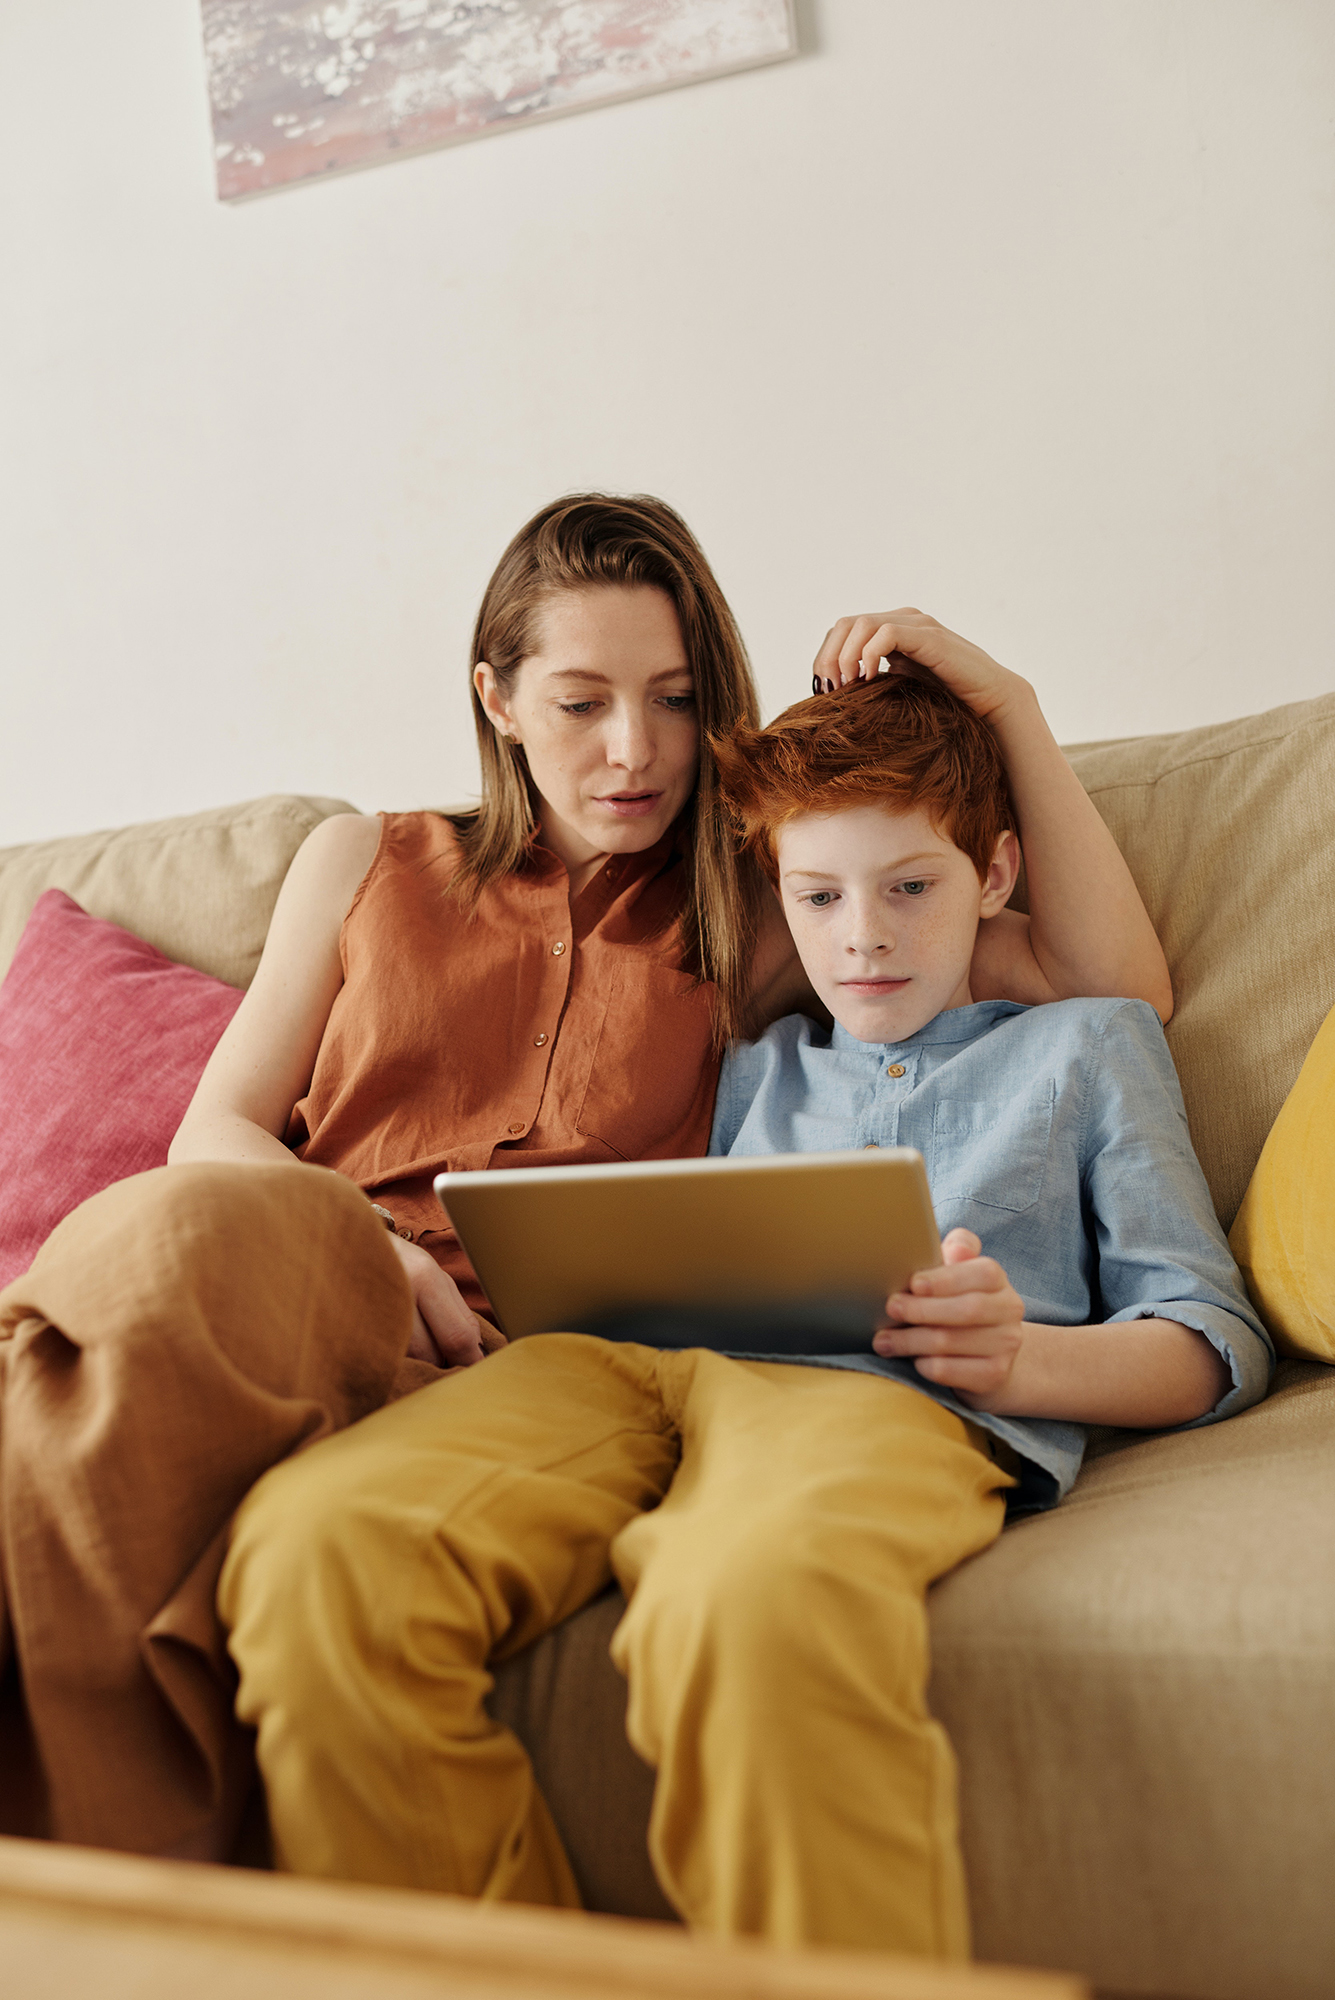 A mother and son sit on a couch and both look at the screen of a tablet